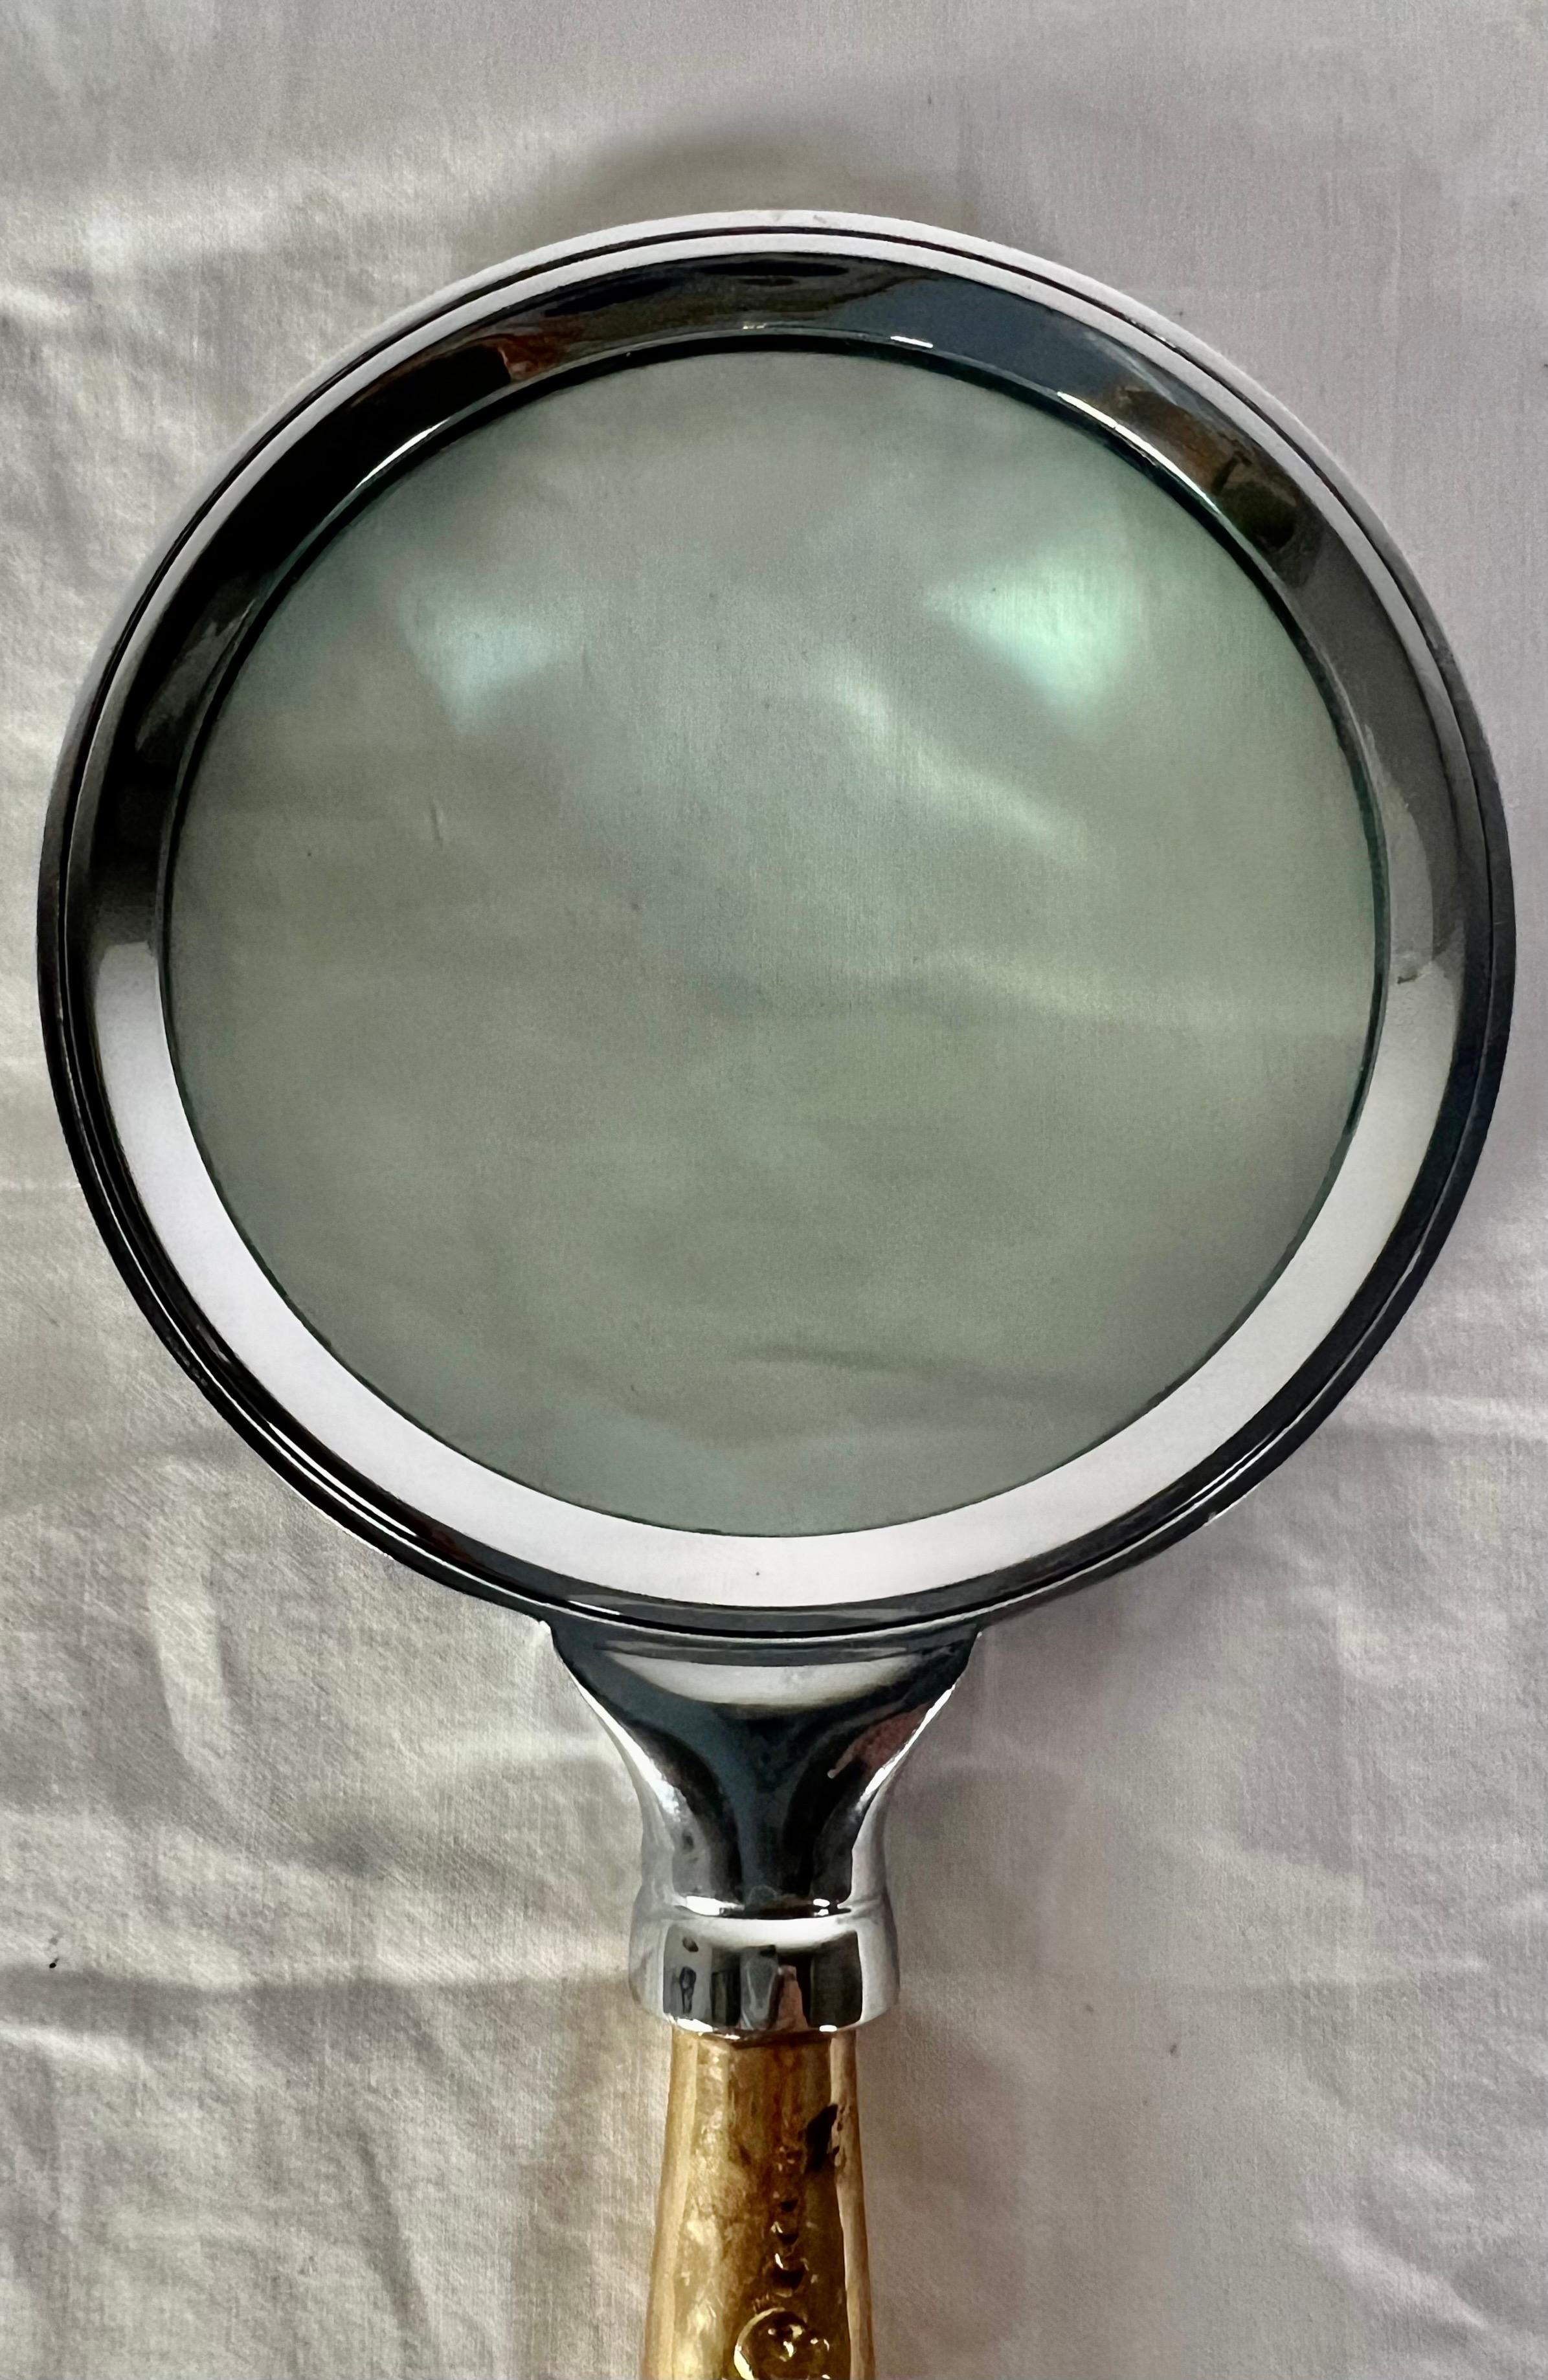 who made the magnifying glass